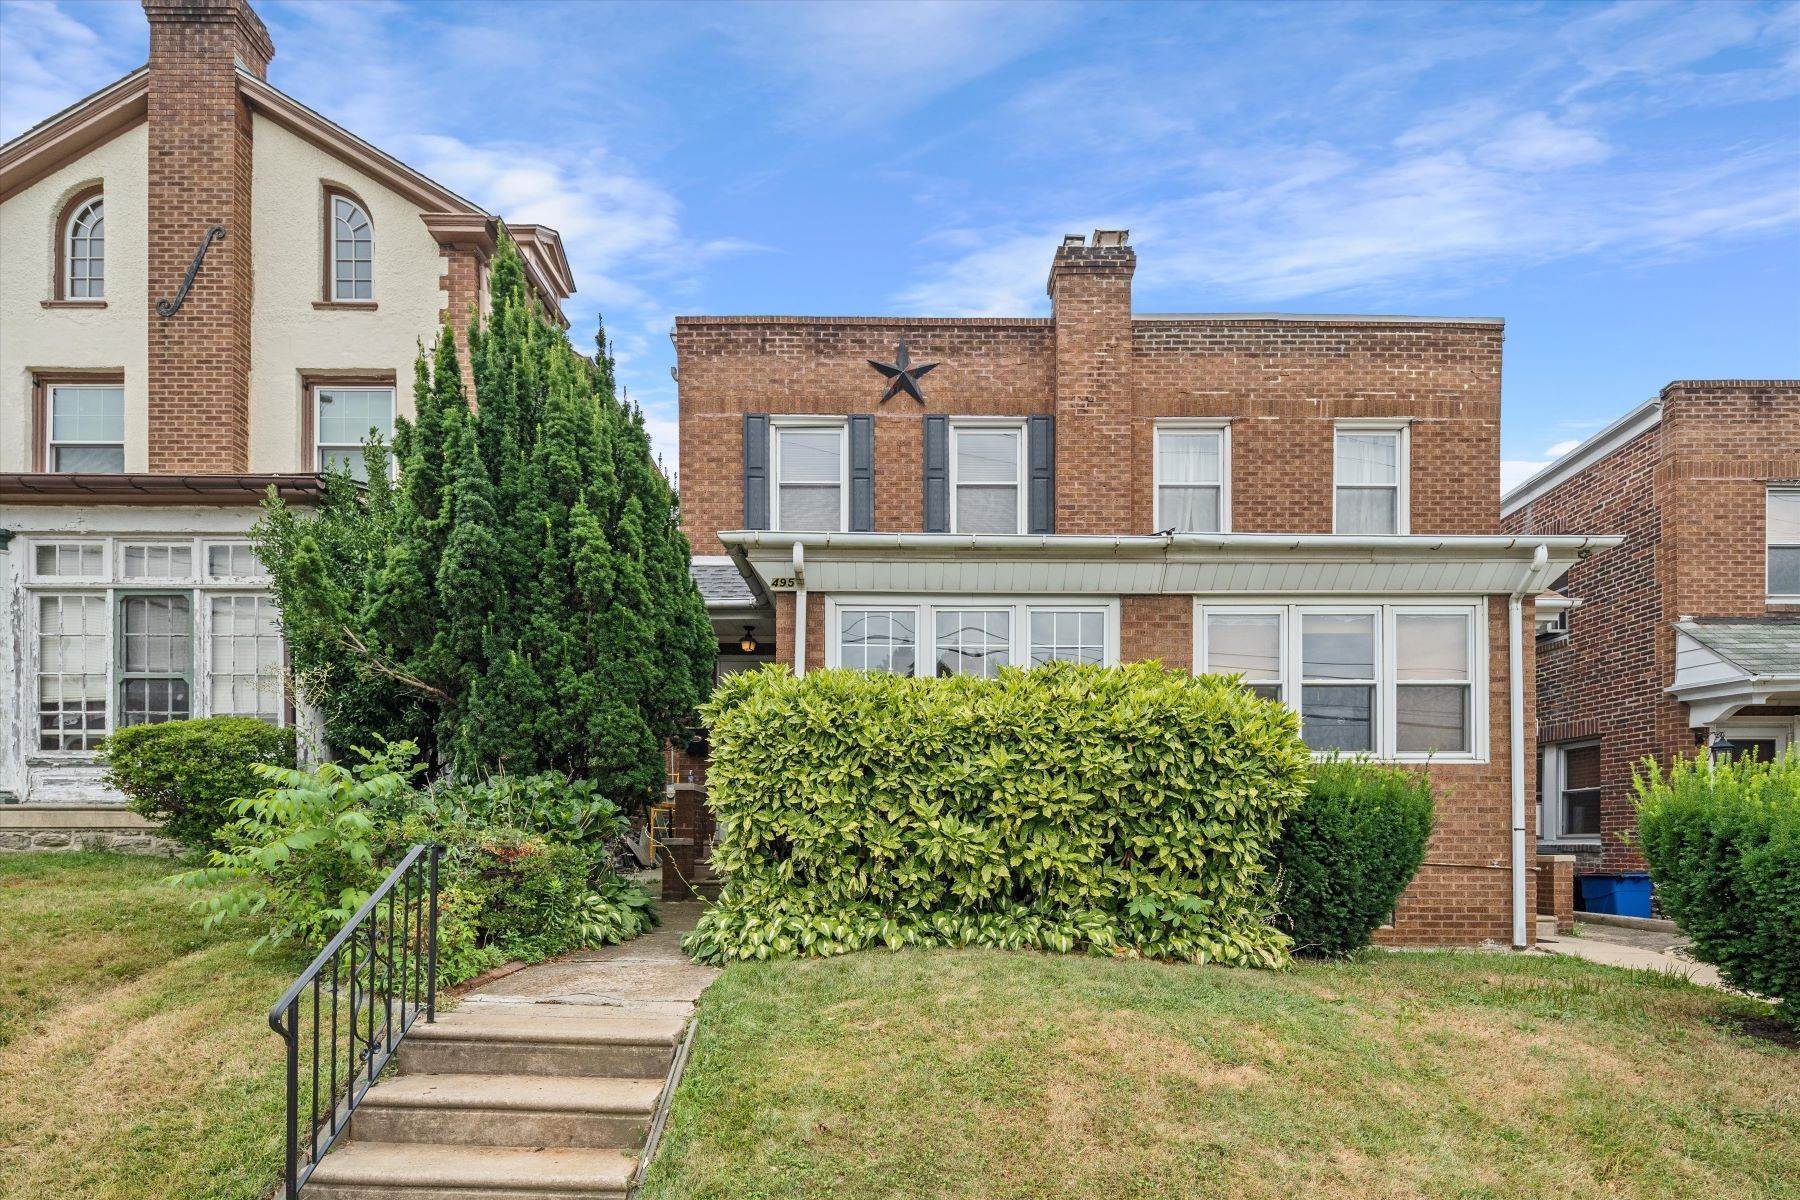 Single Family Homes for Sale at 495 Shurs Lane, Philadelphia, PA 19128 495 Shurs Lane Philadelphia, Pennsylvania 19128 United States